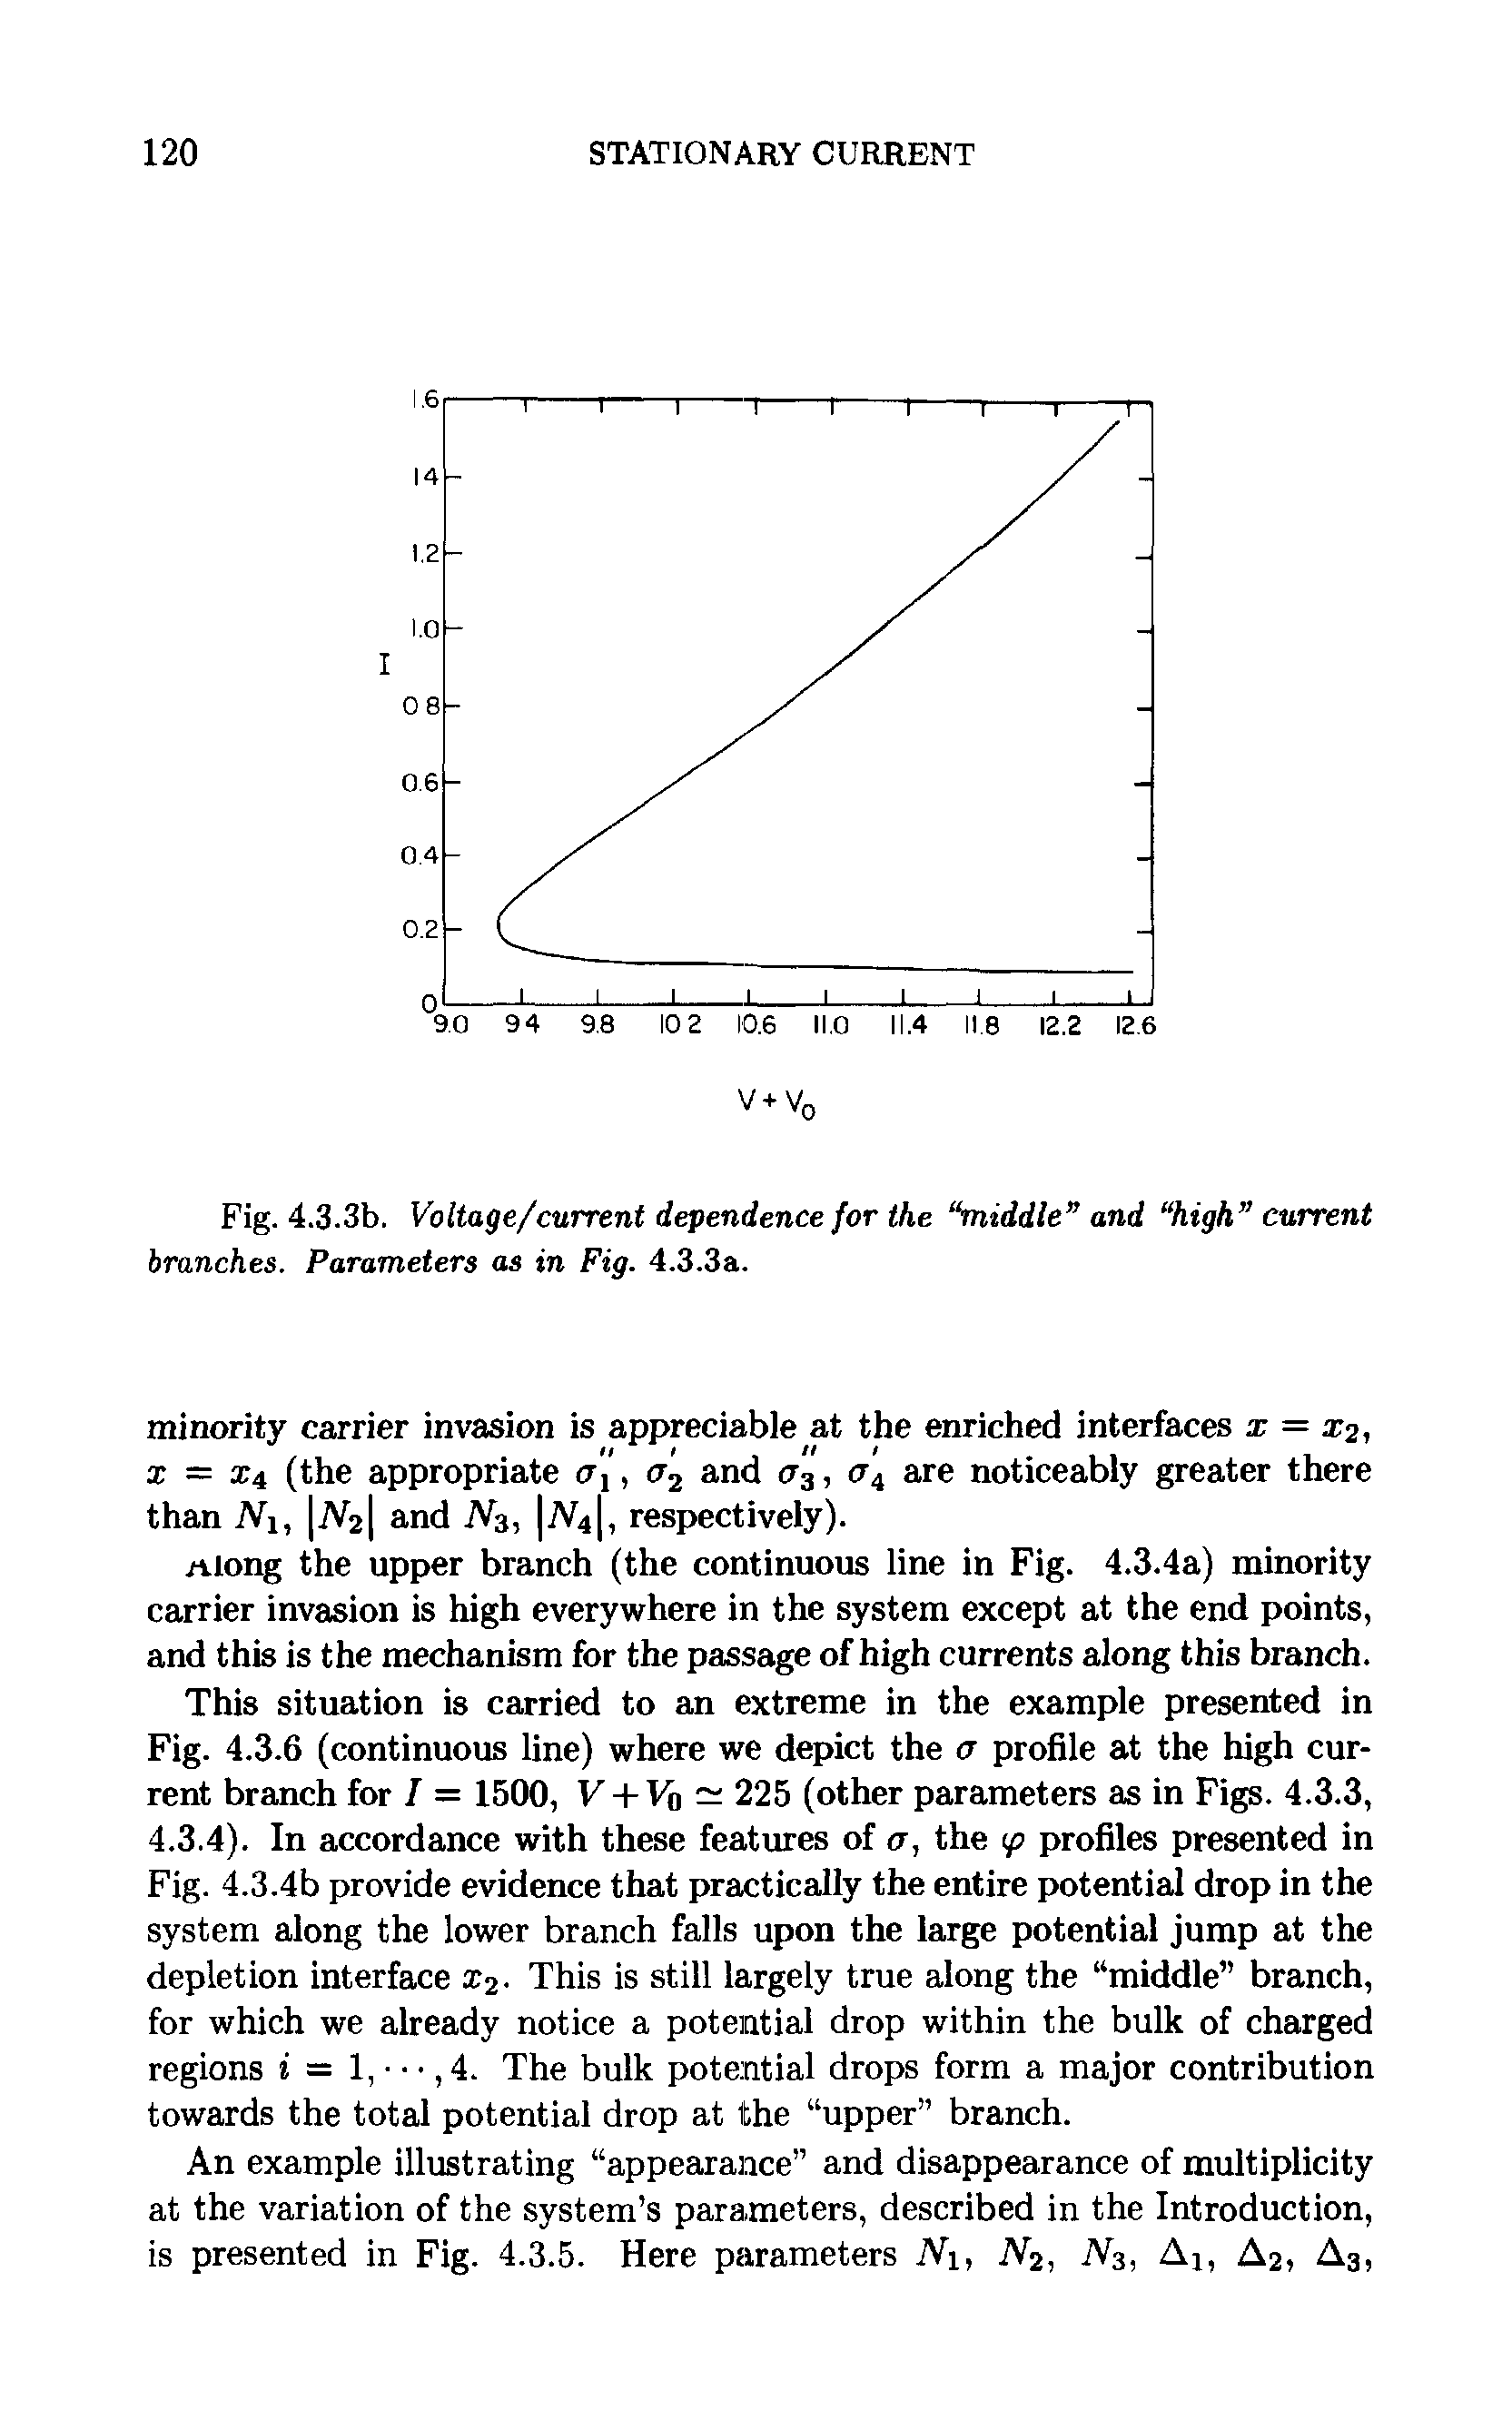 Fig. 4.3.3b. Voltage/current dependence for the middle and high current branches. Parameters as in Fig. 4.3.3a.